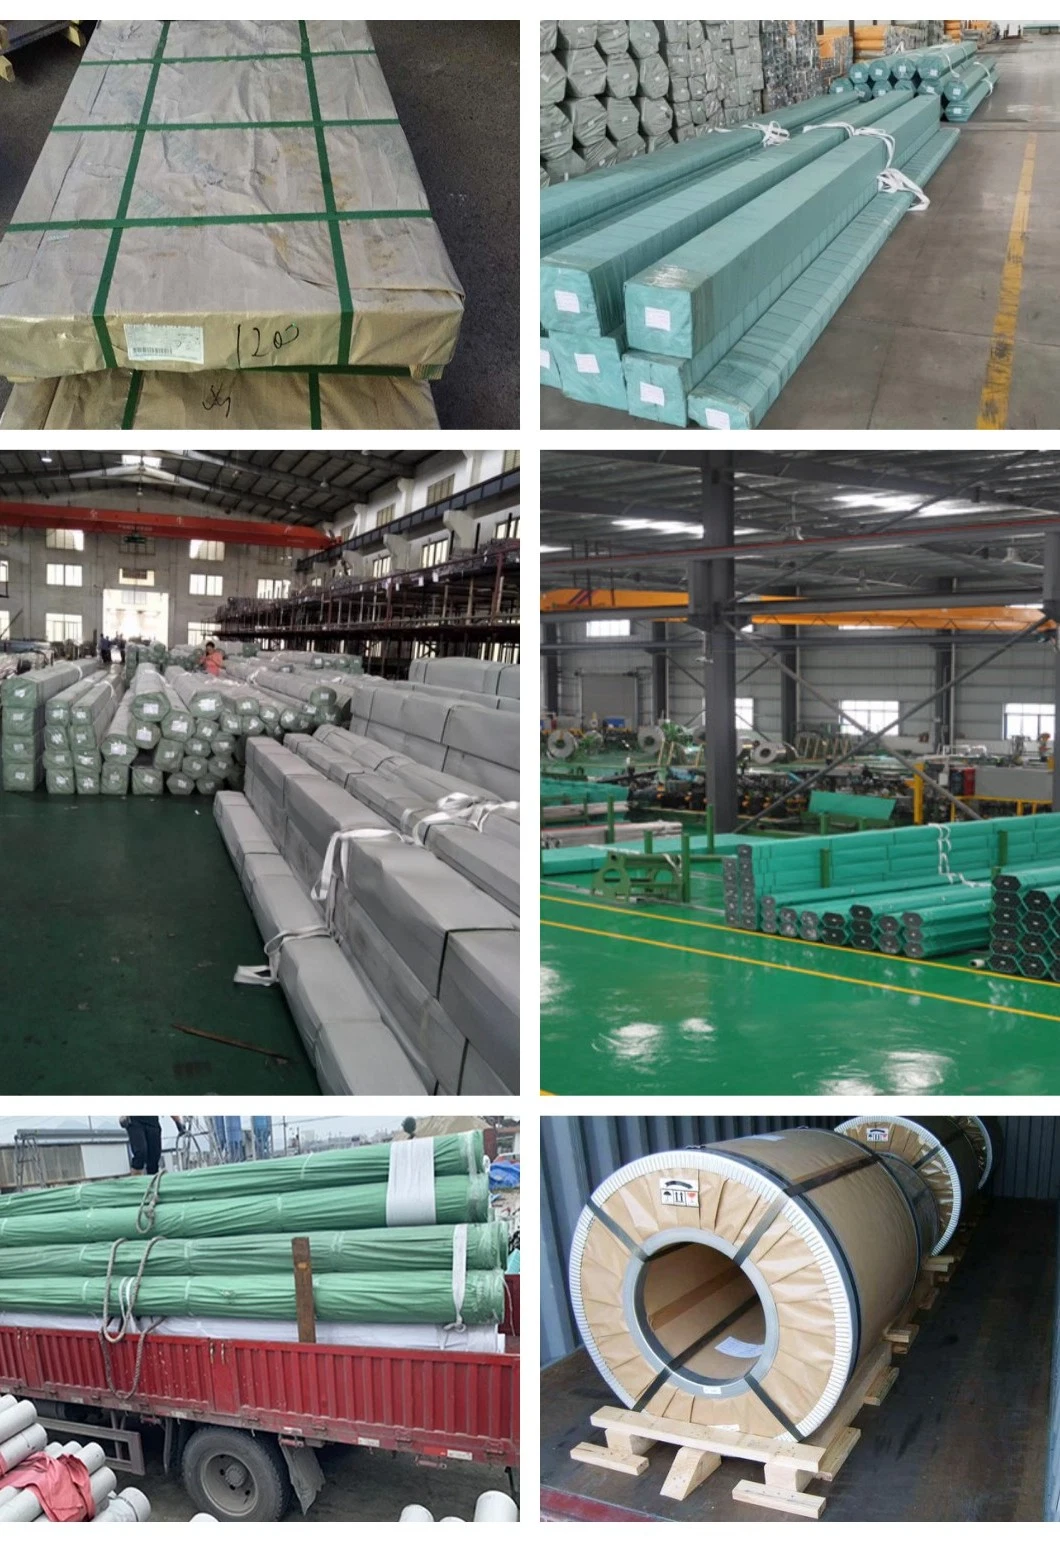 Stainless Steel Rod 201 202 316L 316ti 1.4302 Cold Drawn Stainless Steel Bright Solid Rod Stainless Steel Round Bar